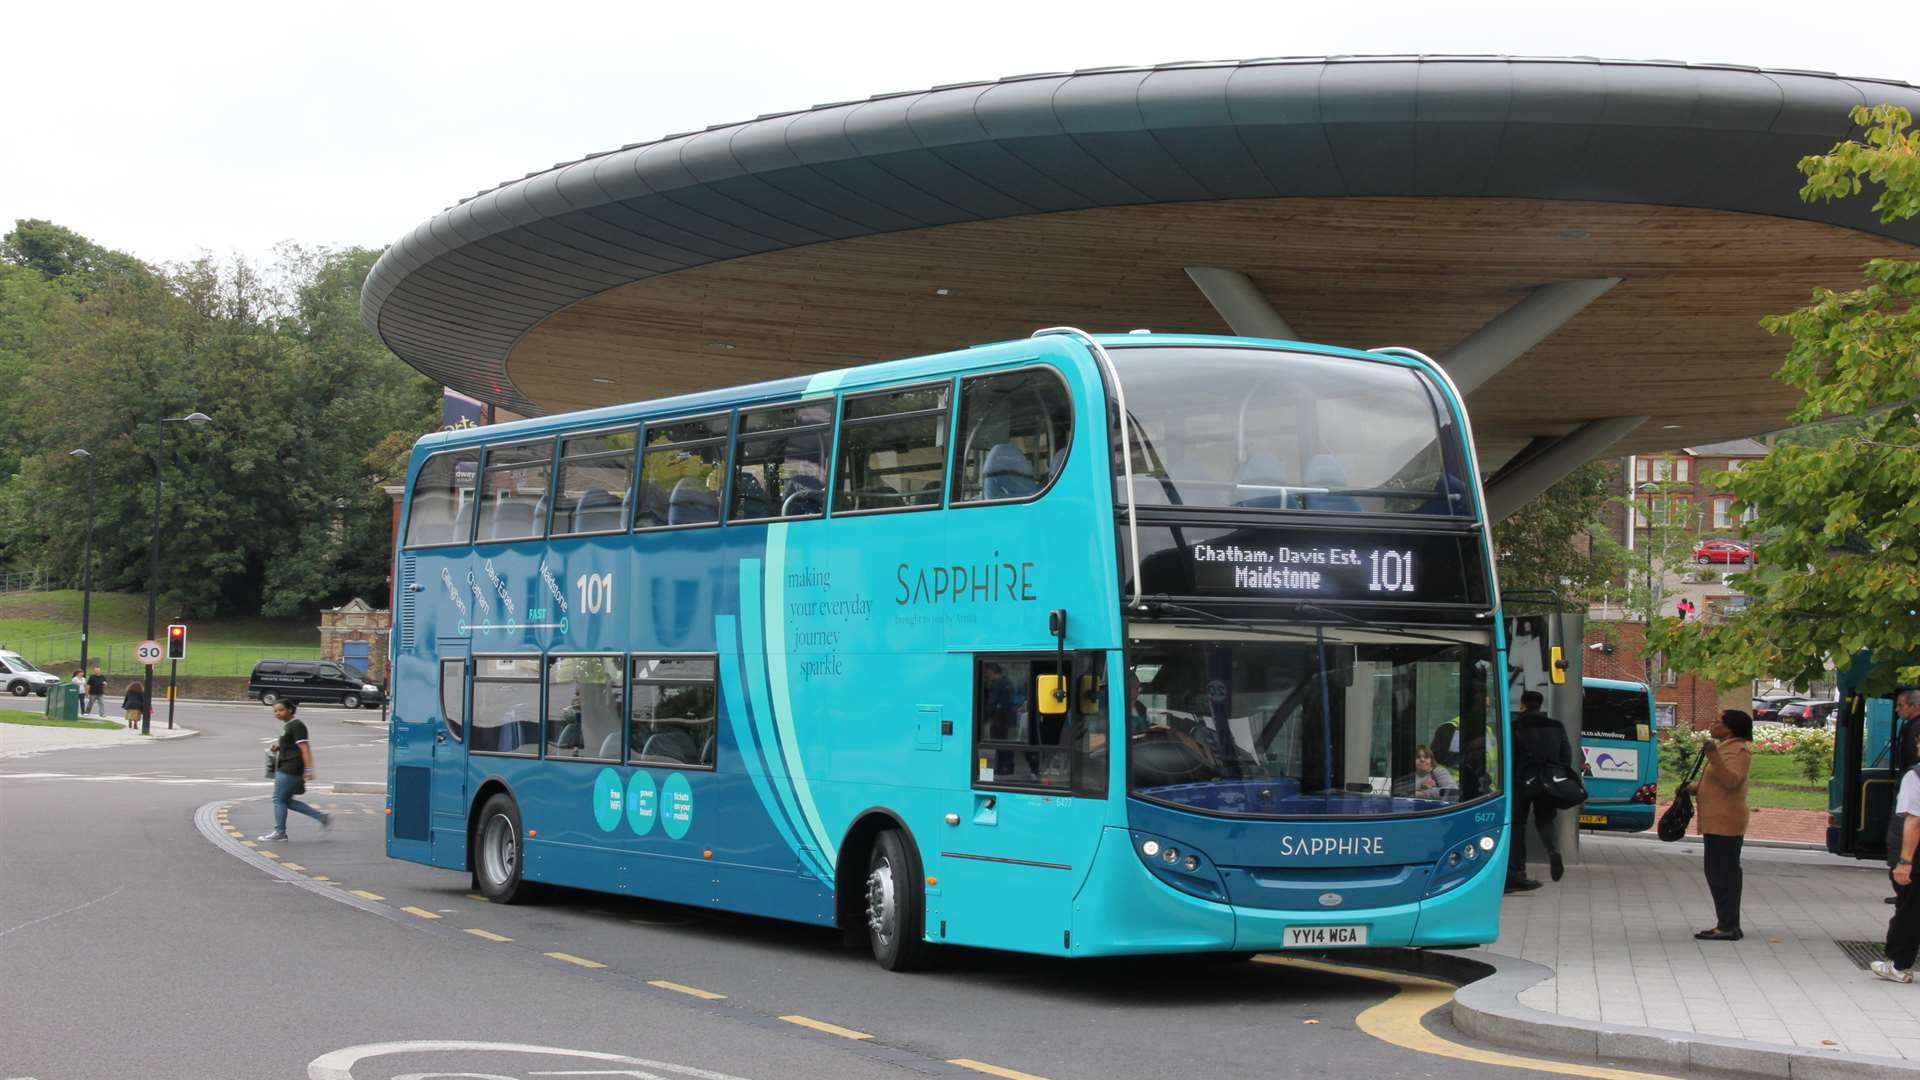 Arriva buses will be diverted